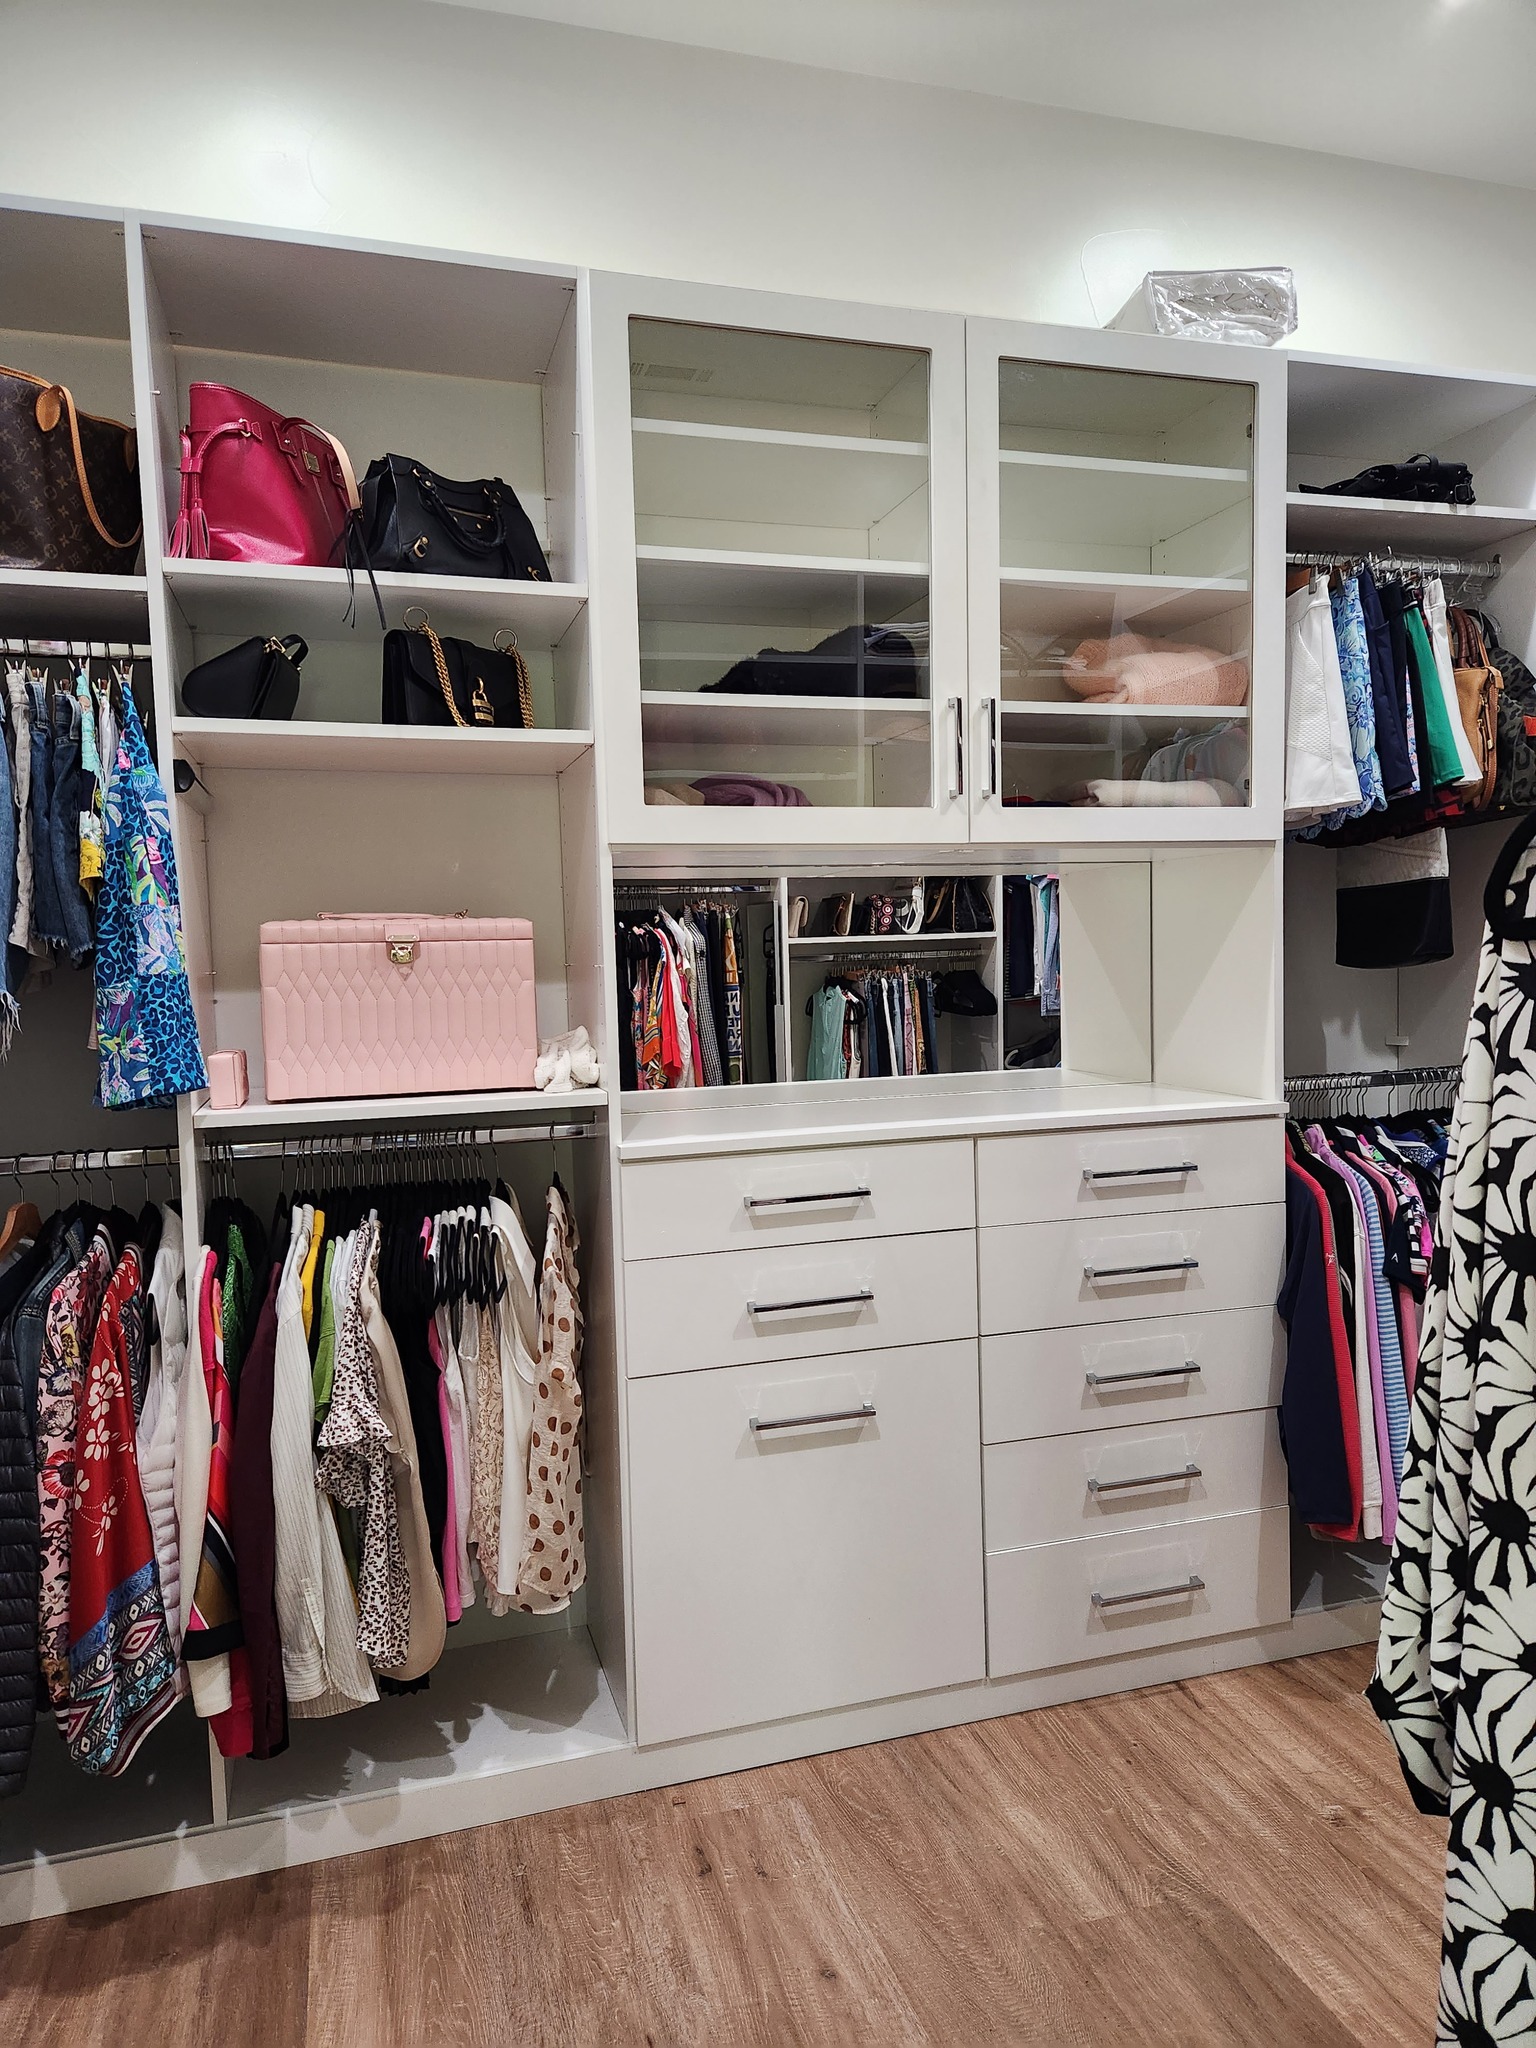 Luxurious Solutions for Small Closet Storage in Greater Palm Springs Homes - Featured Image